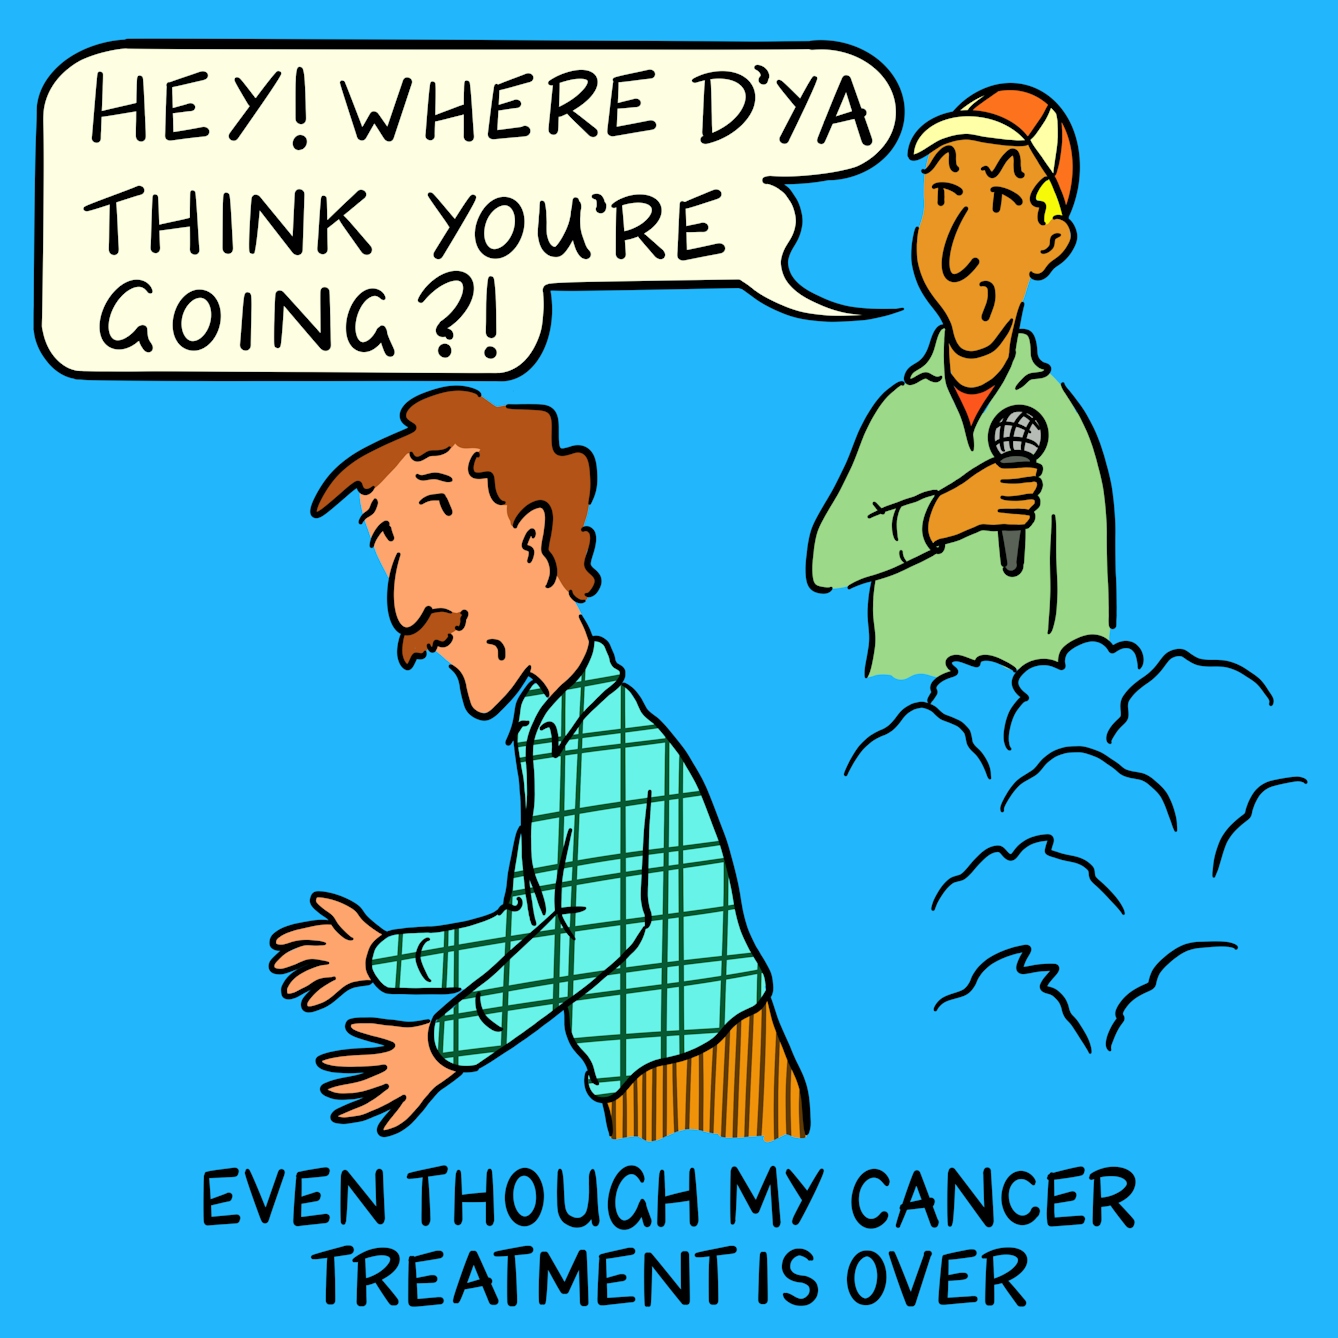 Panel 1 of a four-panel comic drawn digitally: a white man with a moustache, corduroy trousers and a plaid shirt is edging out of the frame with the outline of seated heads around waist-height. A person wearing a baseball cap and holding a microphone says "Hey! Where d'ya think you're going?!" The caption text reads "Even though my cancer treatment is over..."